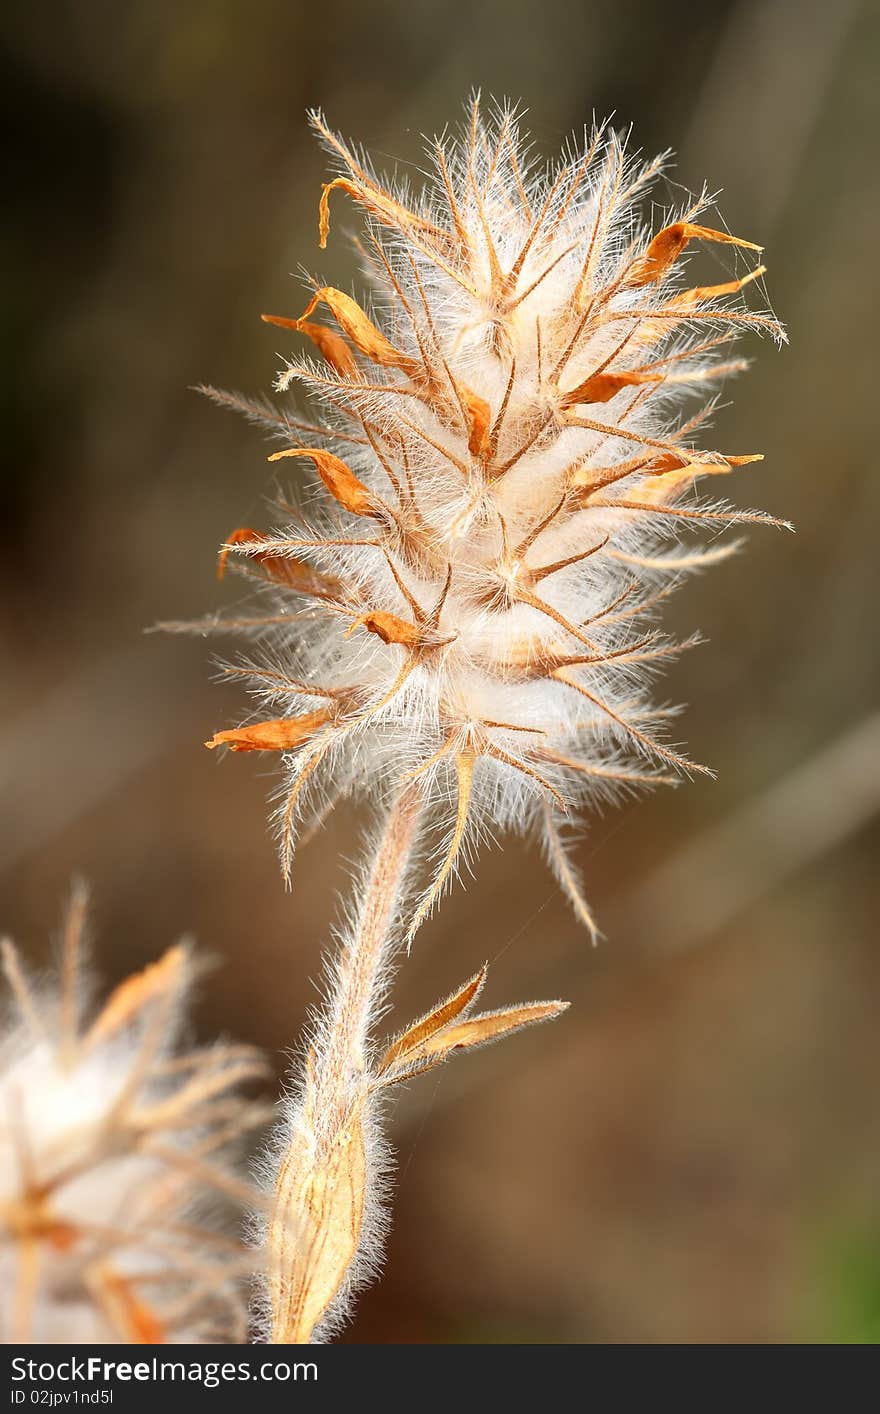 Plant with dense white hairs, Israel. Plant with dense white hairs, Israel